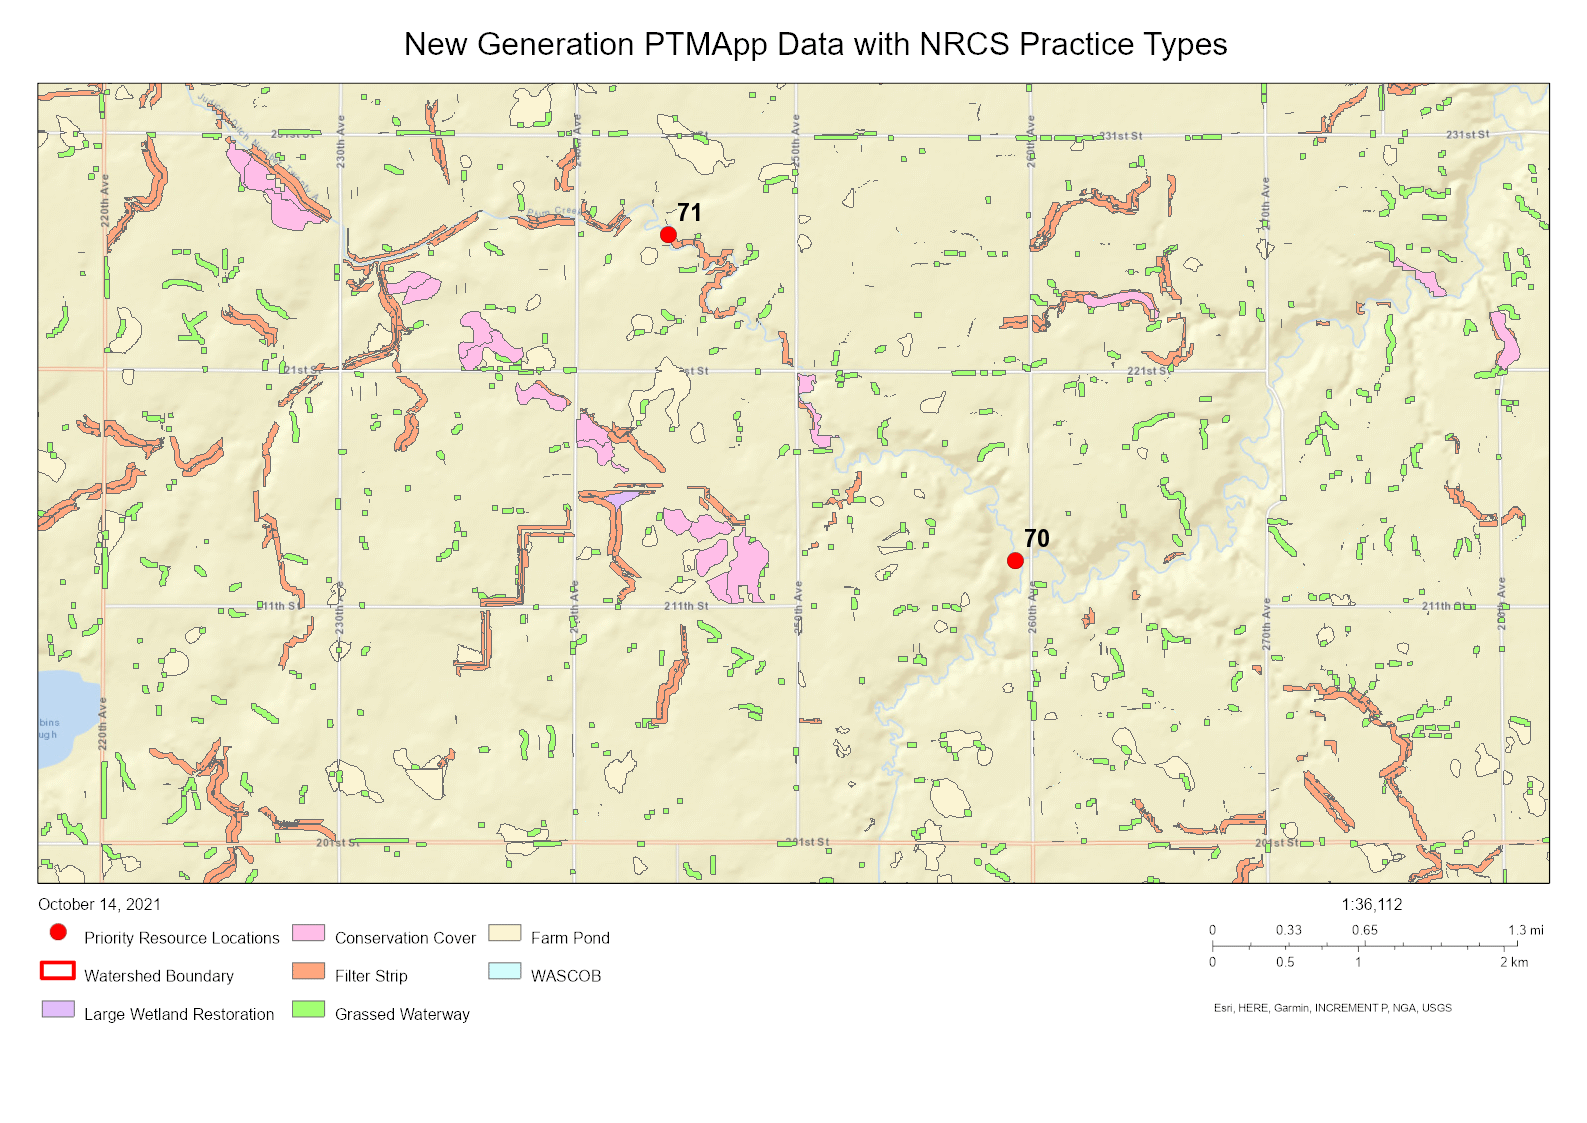 Graphic shows a sample of the PTMApp map with NRCS practice type locations displayed.